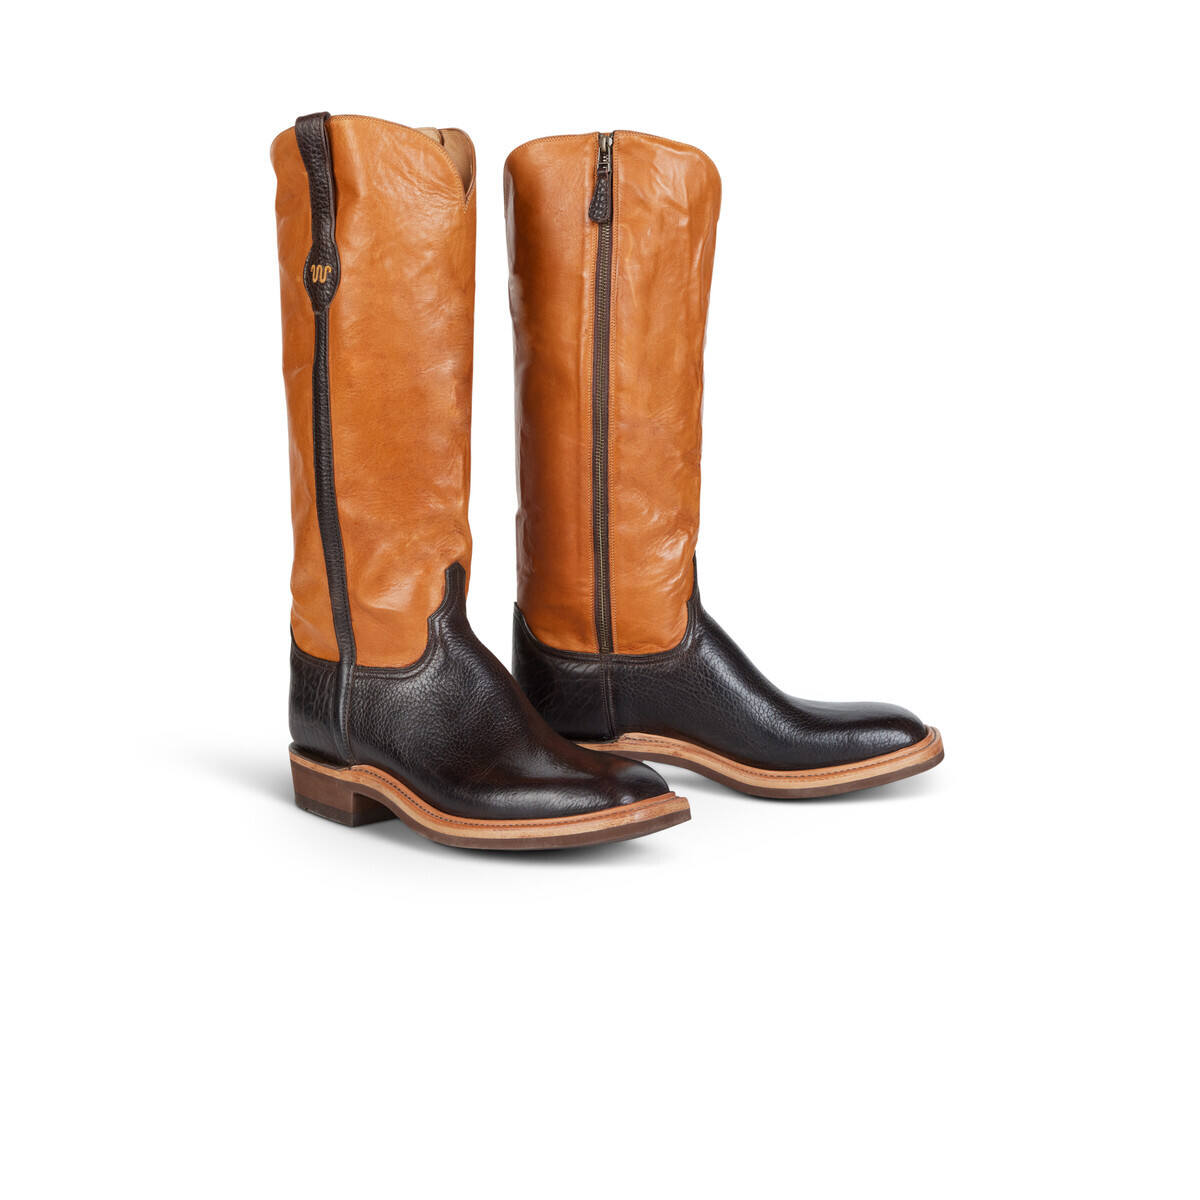 KING RANCH LUCCHESE SNAKE BOOT - BISON